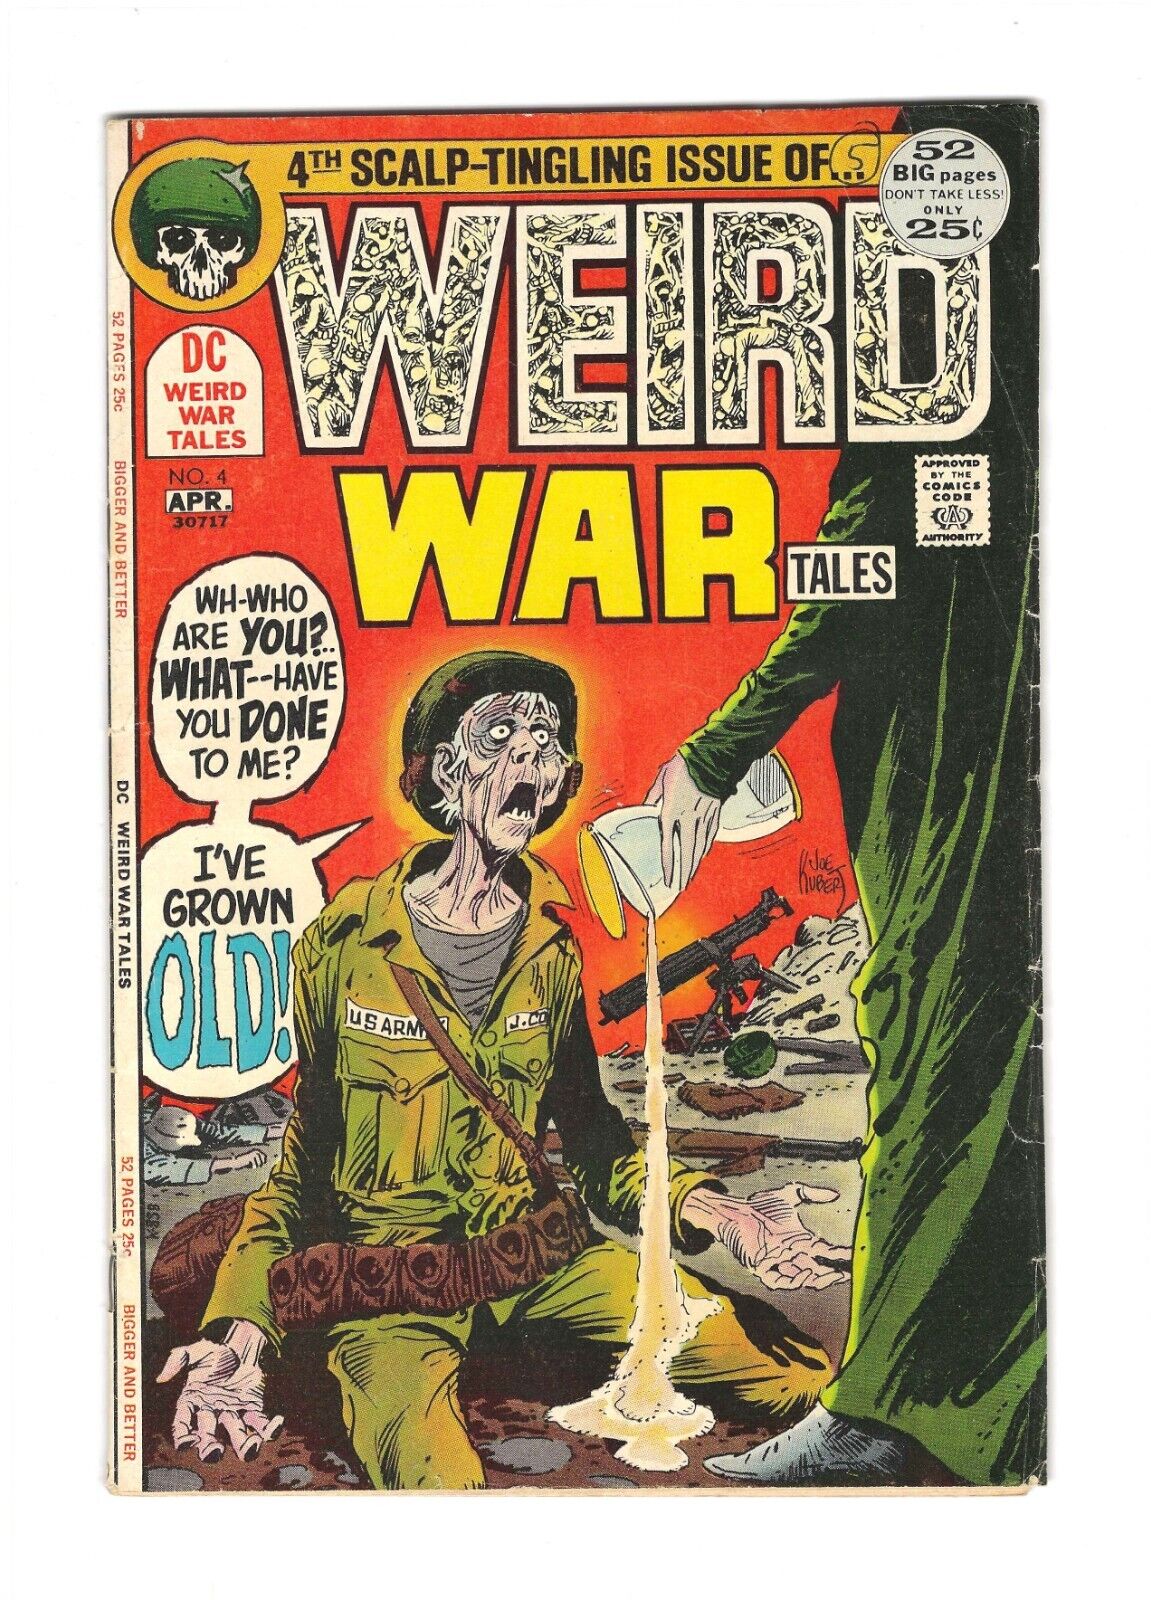 Weird War Tales #4: Dry Cleaned: Pressed: Bagged: Boarded FN 6.0